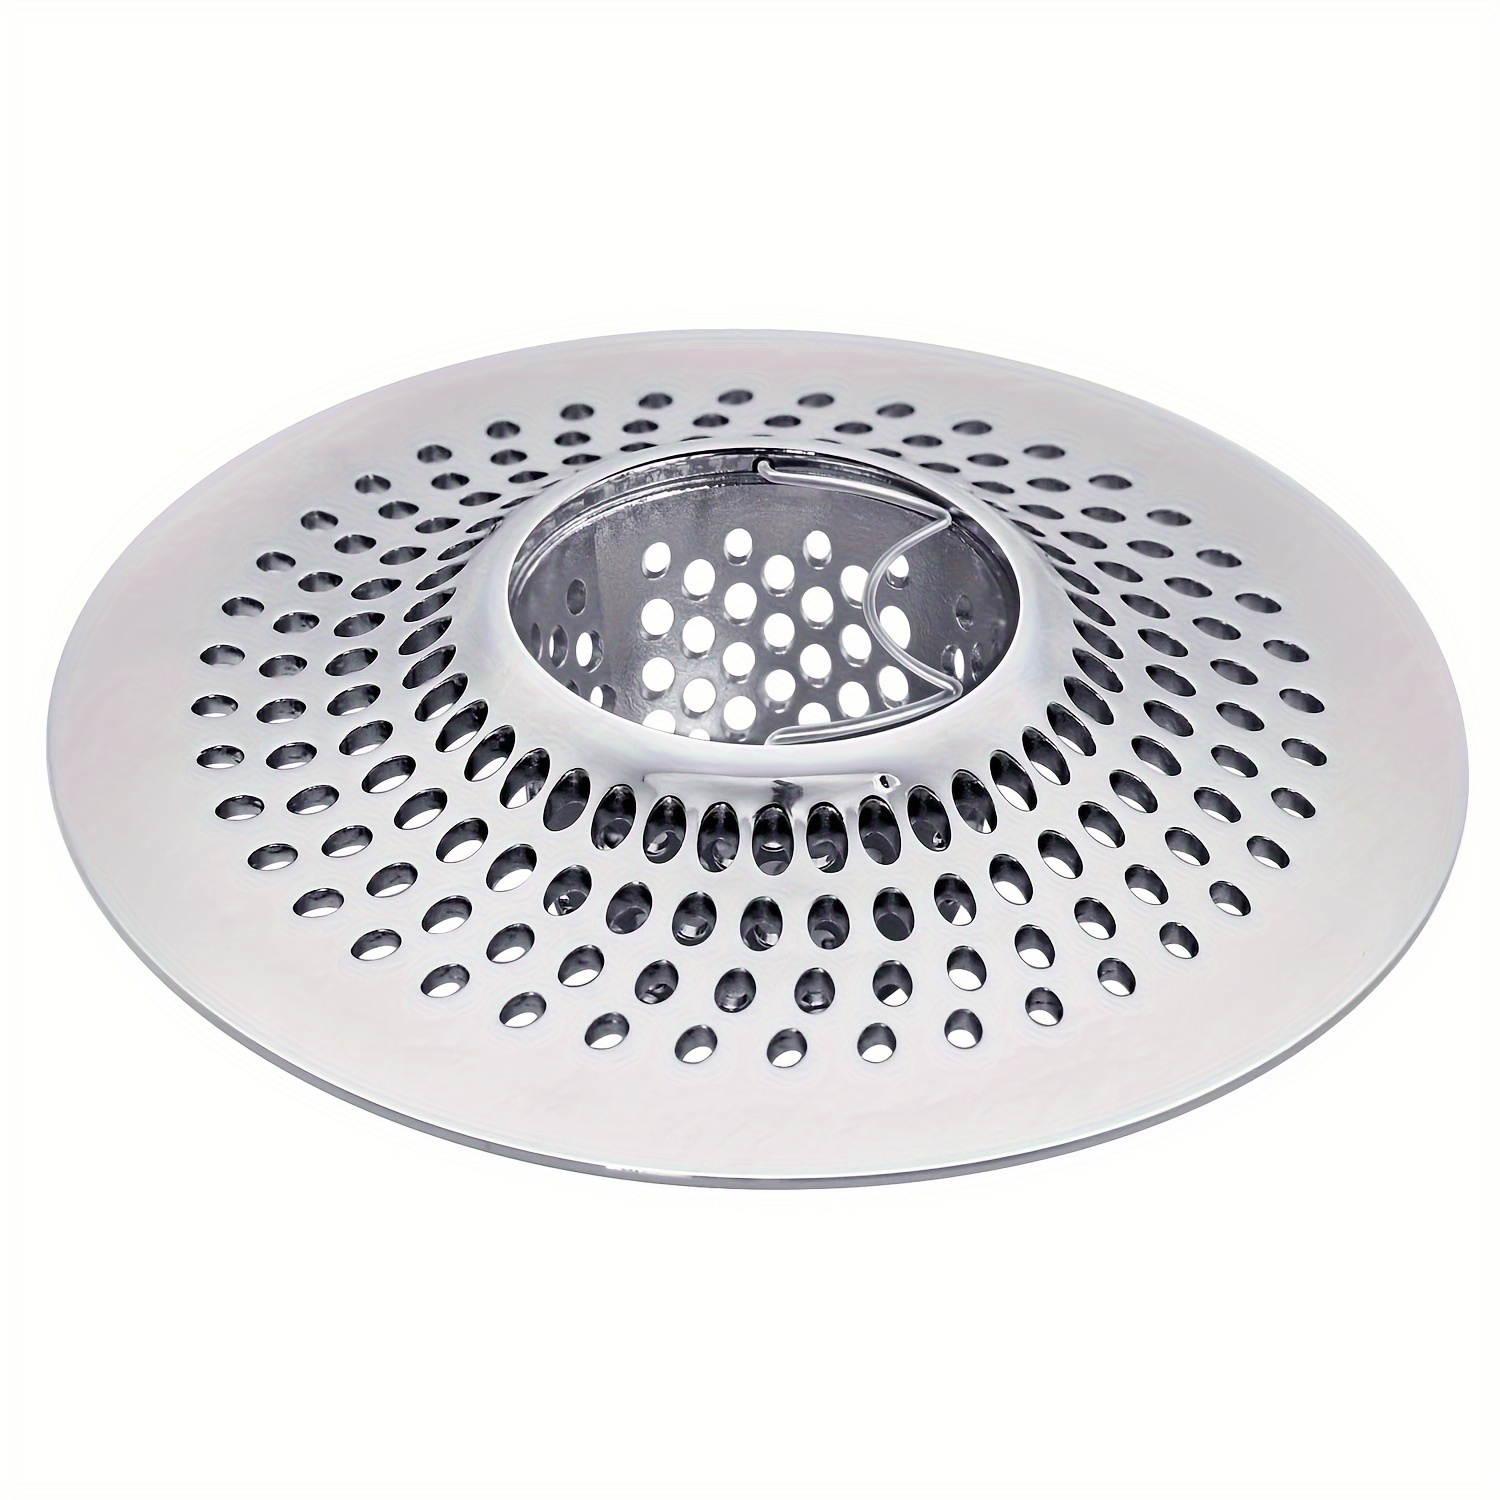 Hair Snare Drain Cover Universal - White